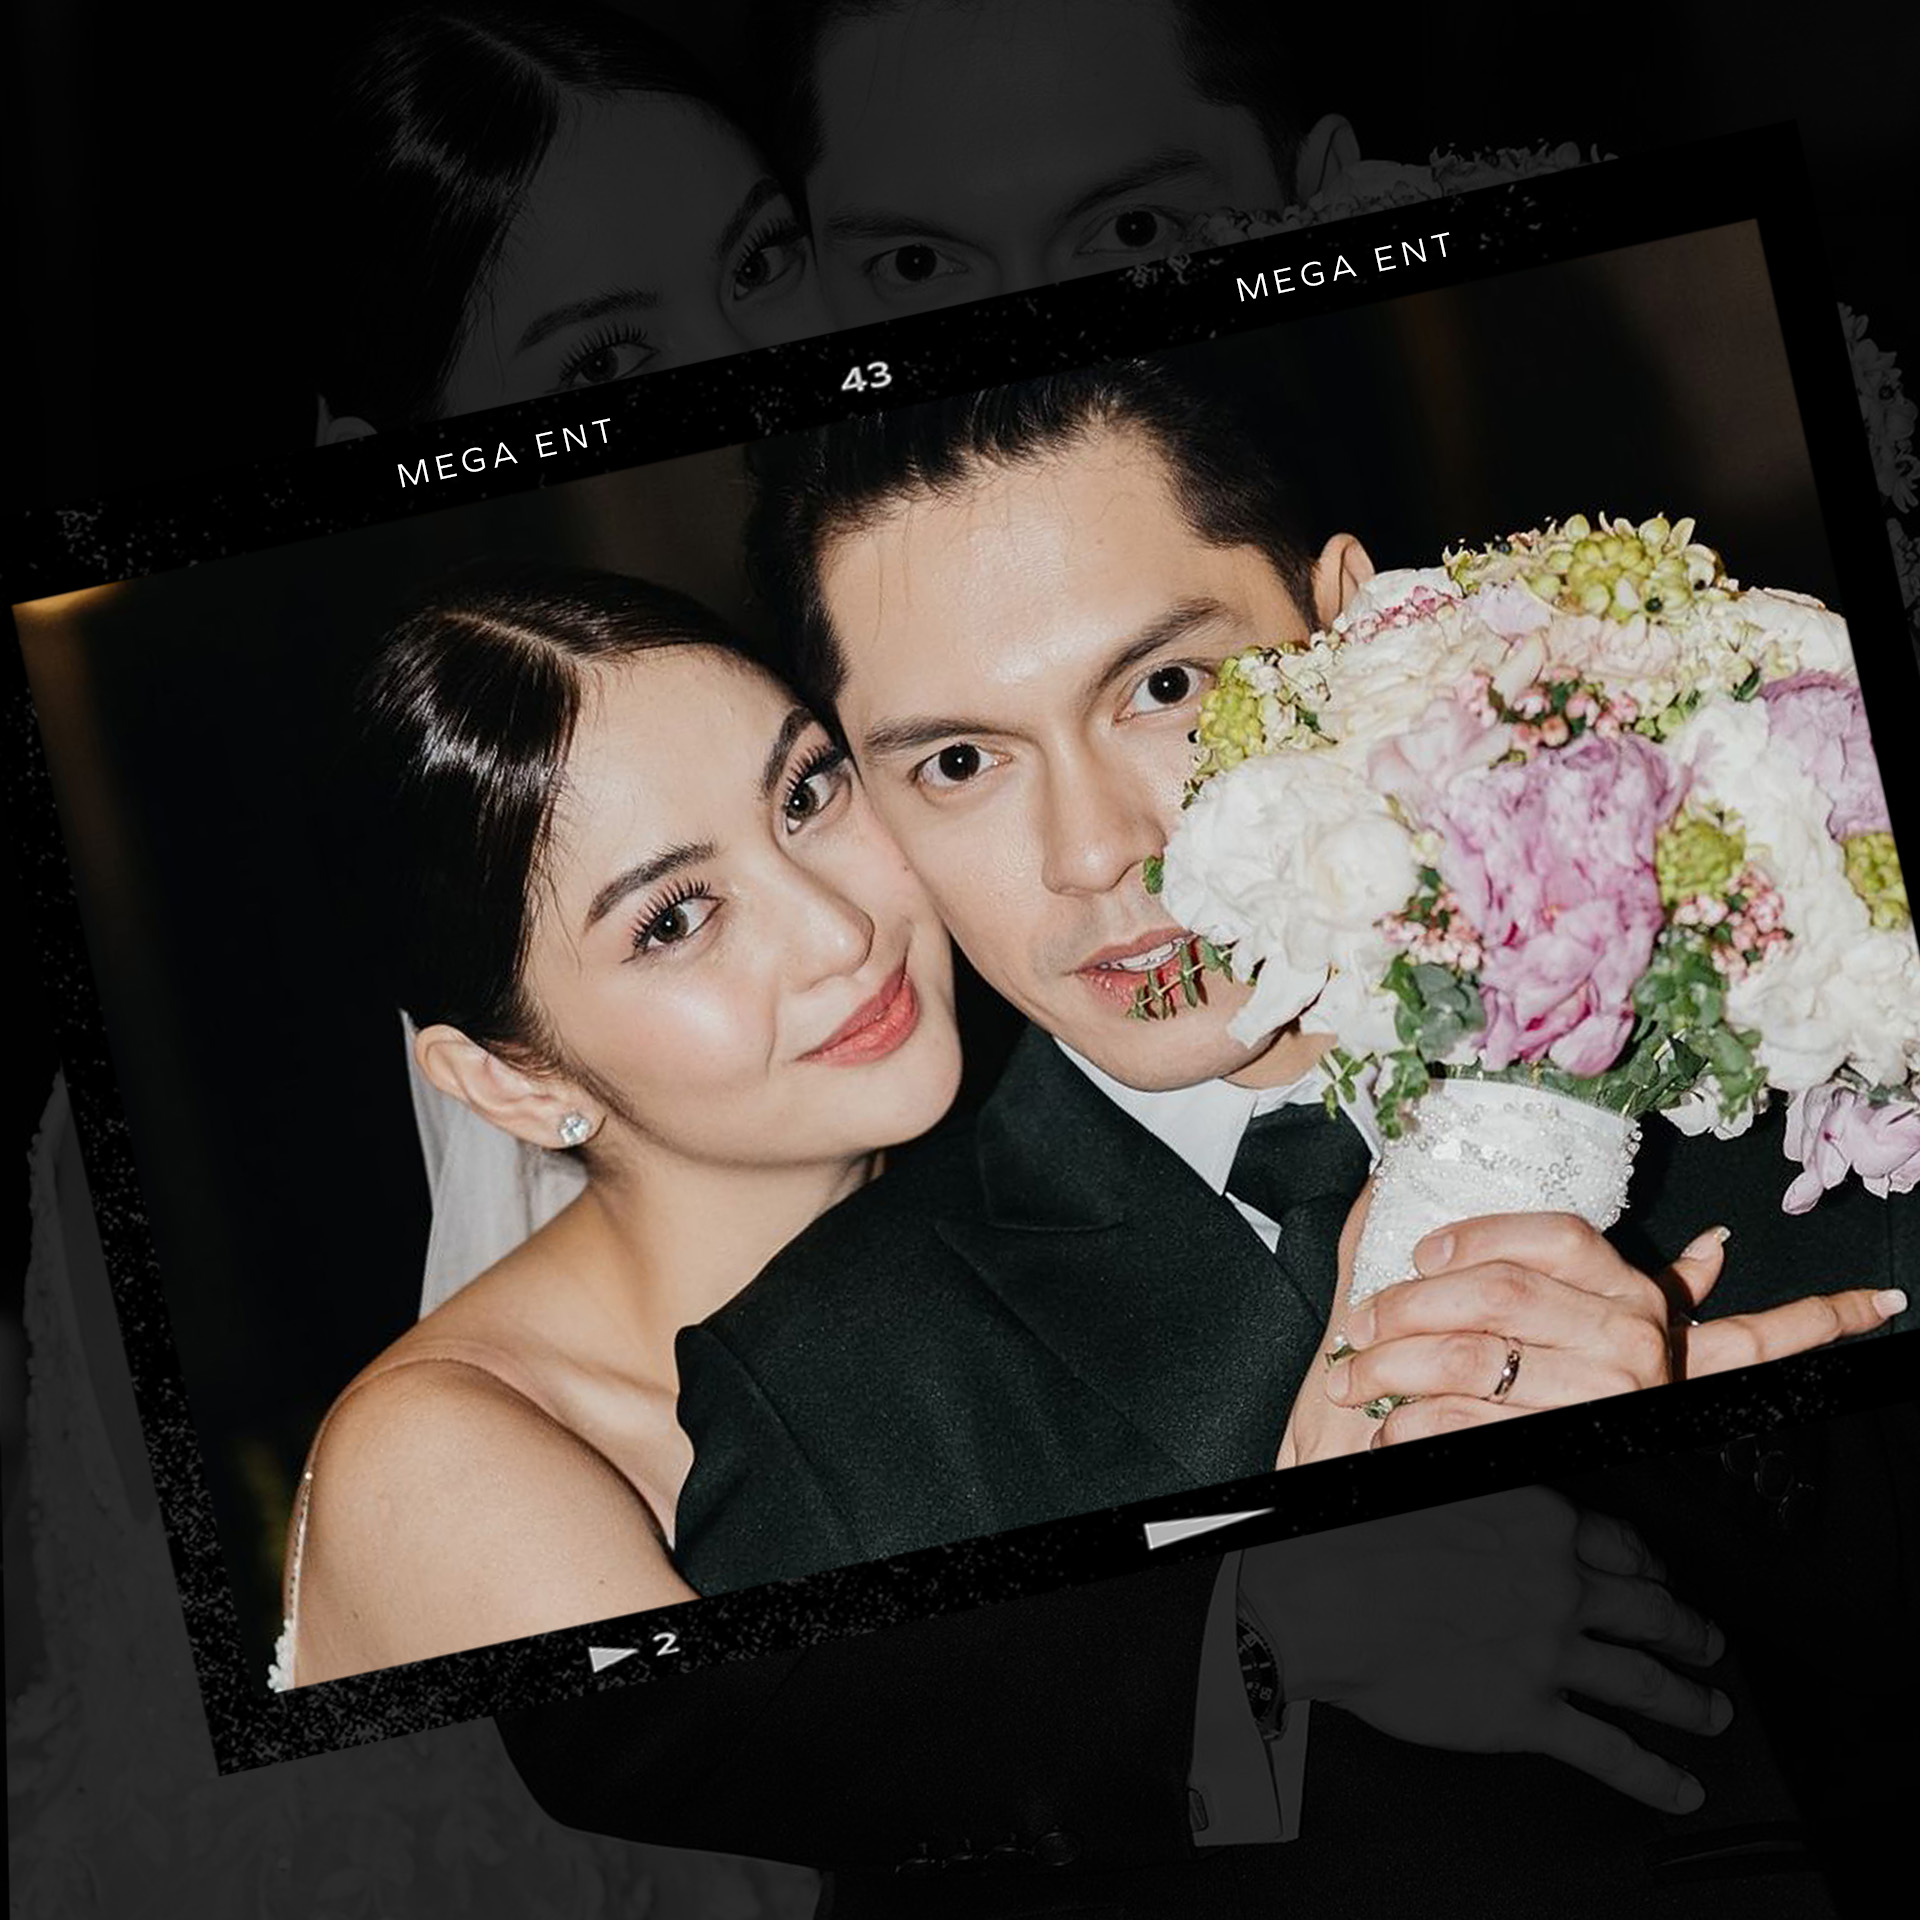 Charlie Dizon Ties the Knot With Carlo Aquino After Her First Gawad Urian Win